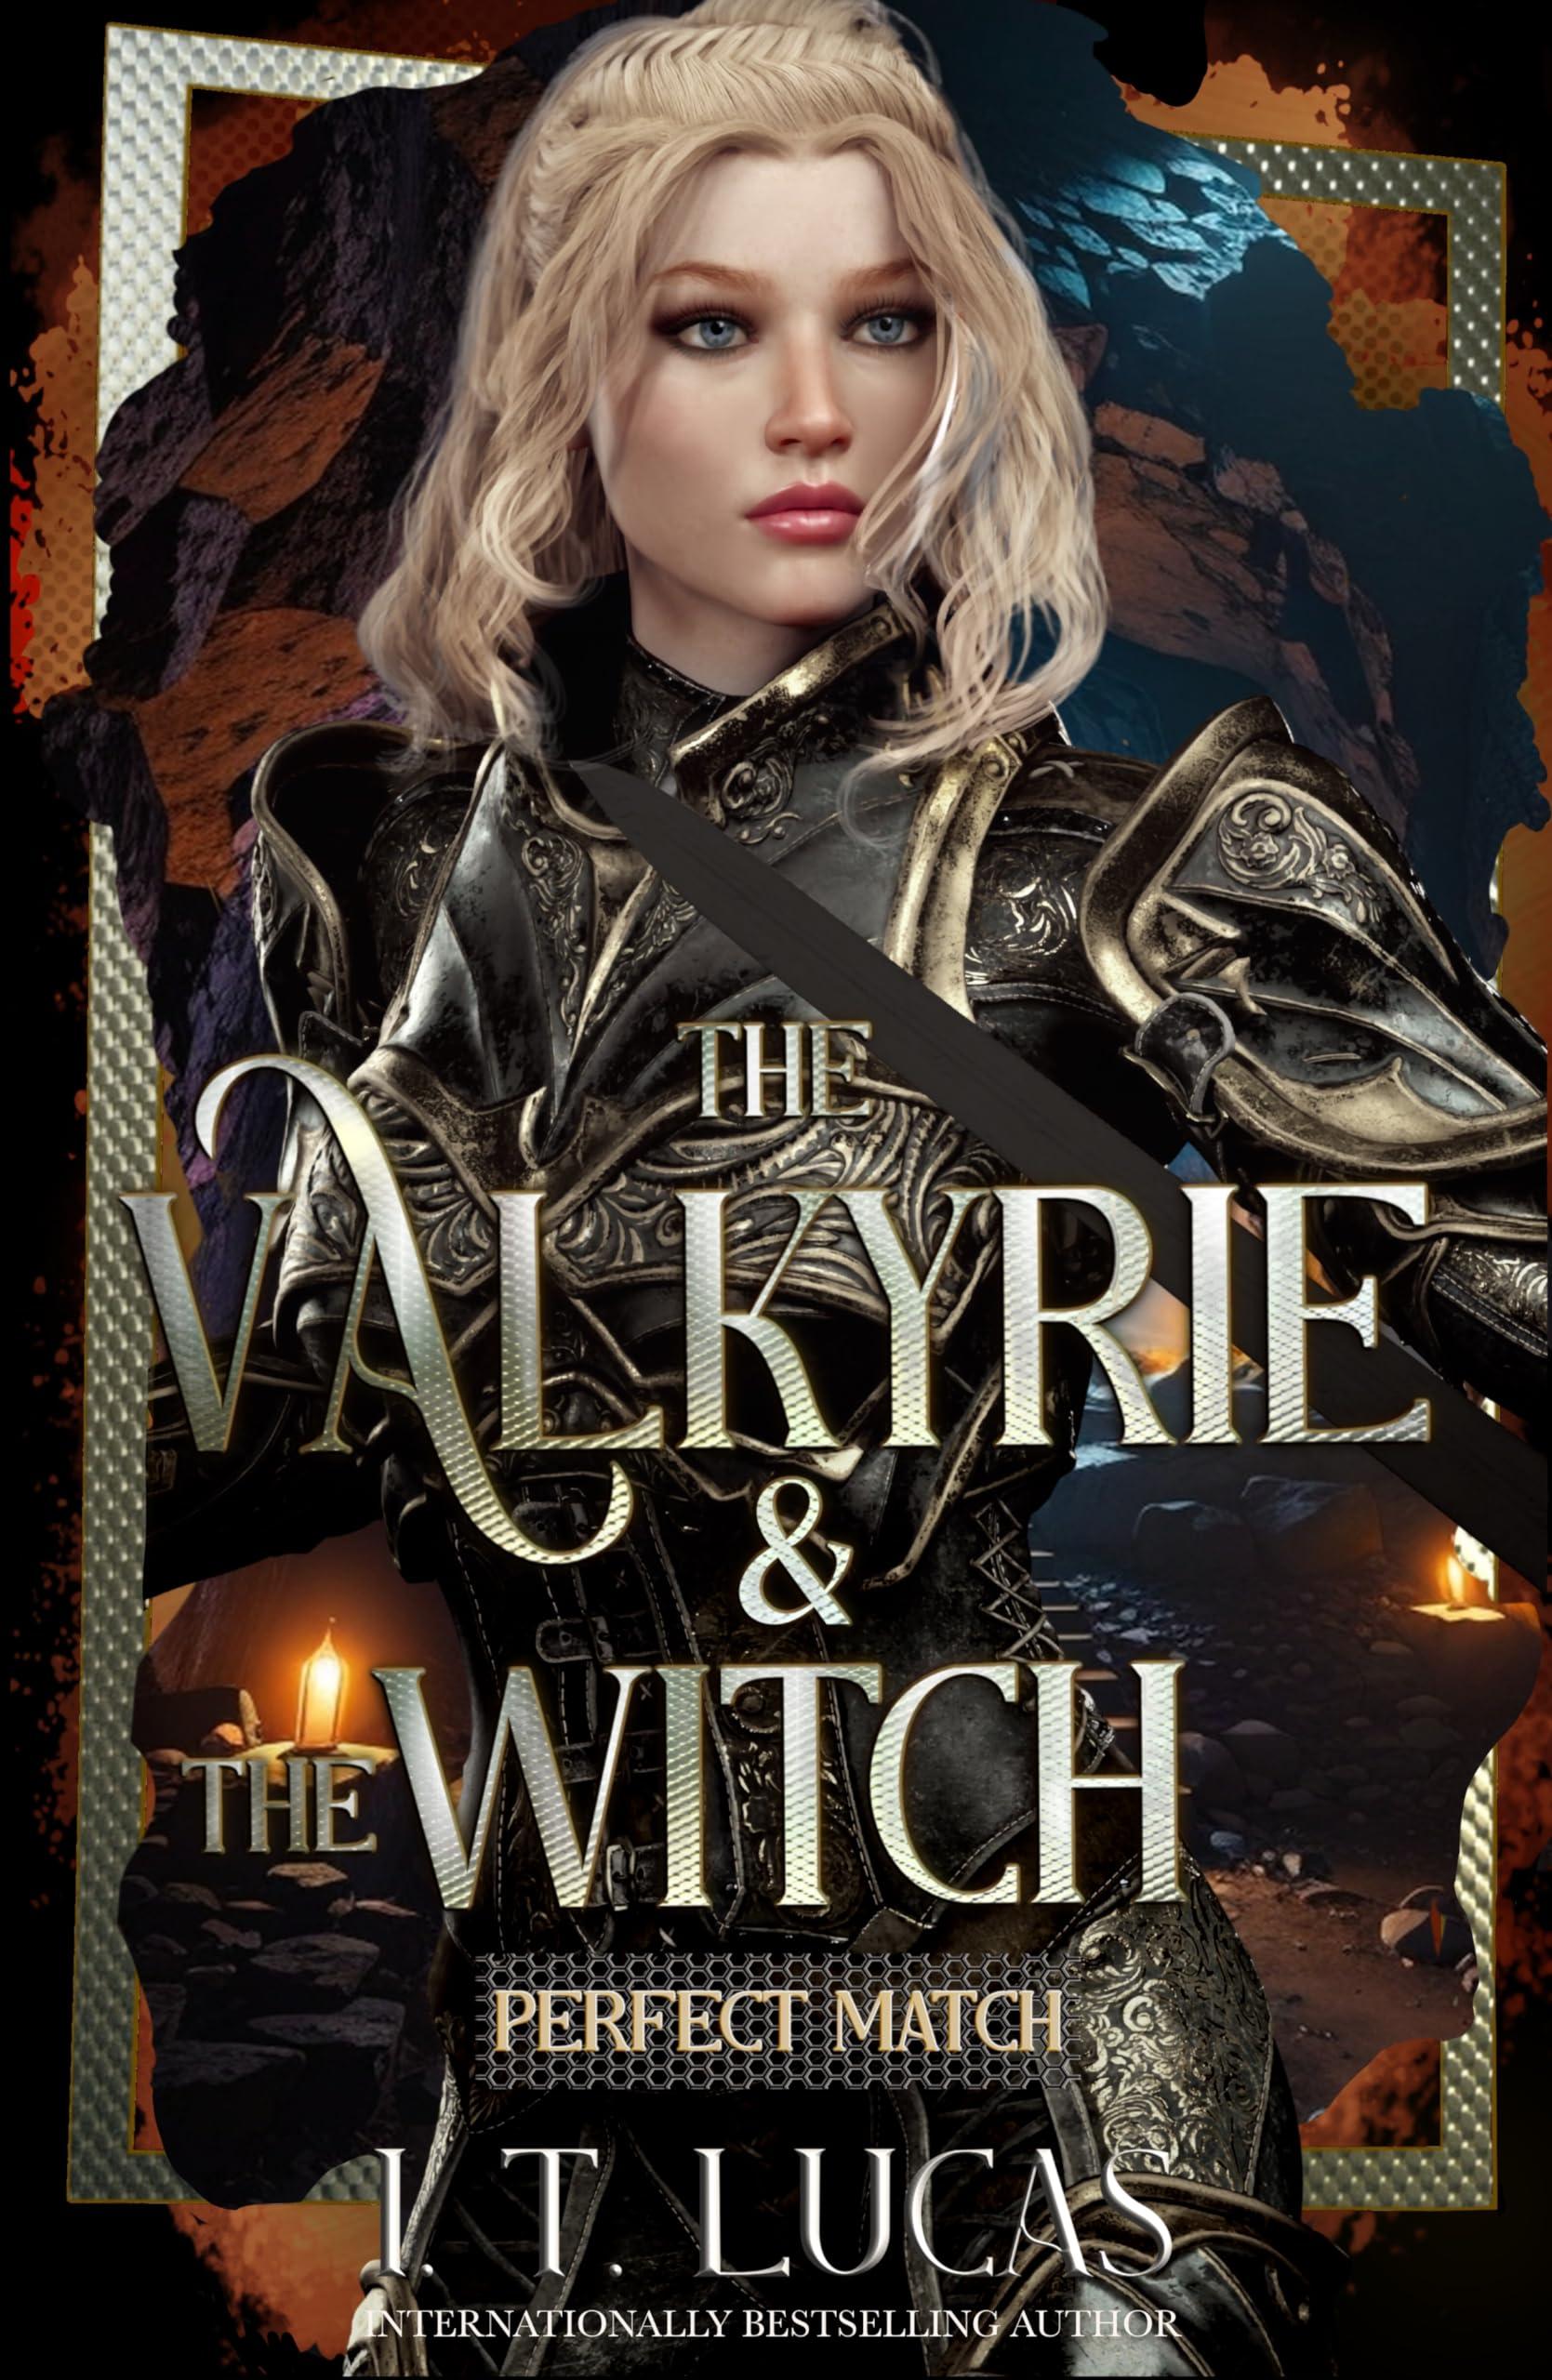 Perfect Match: The Valkyrie & The Witch